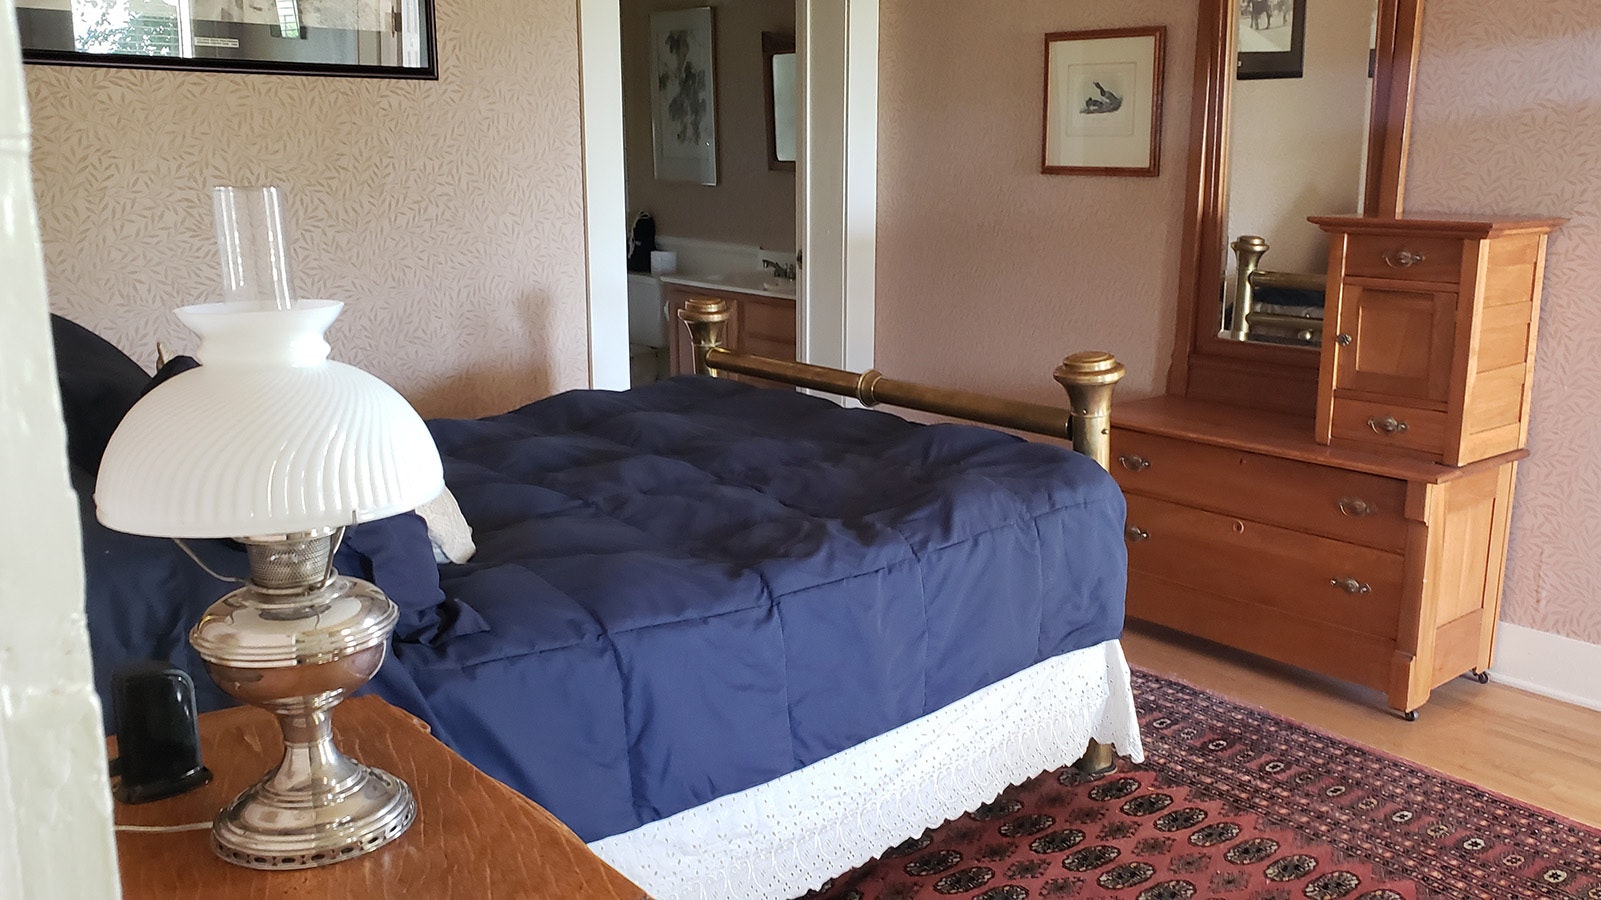 One of the bedrooms in the Ranch House.